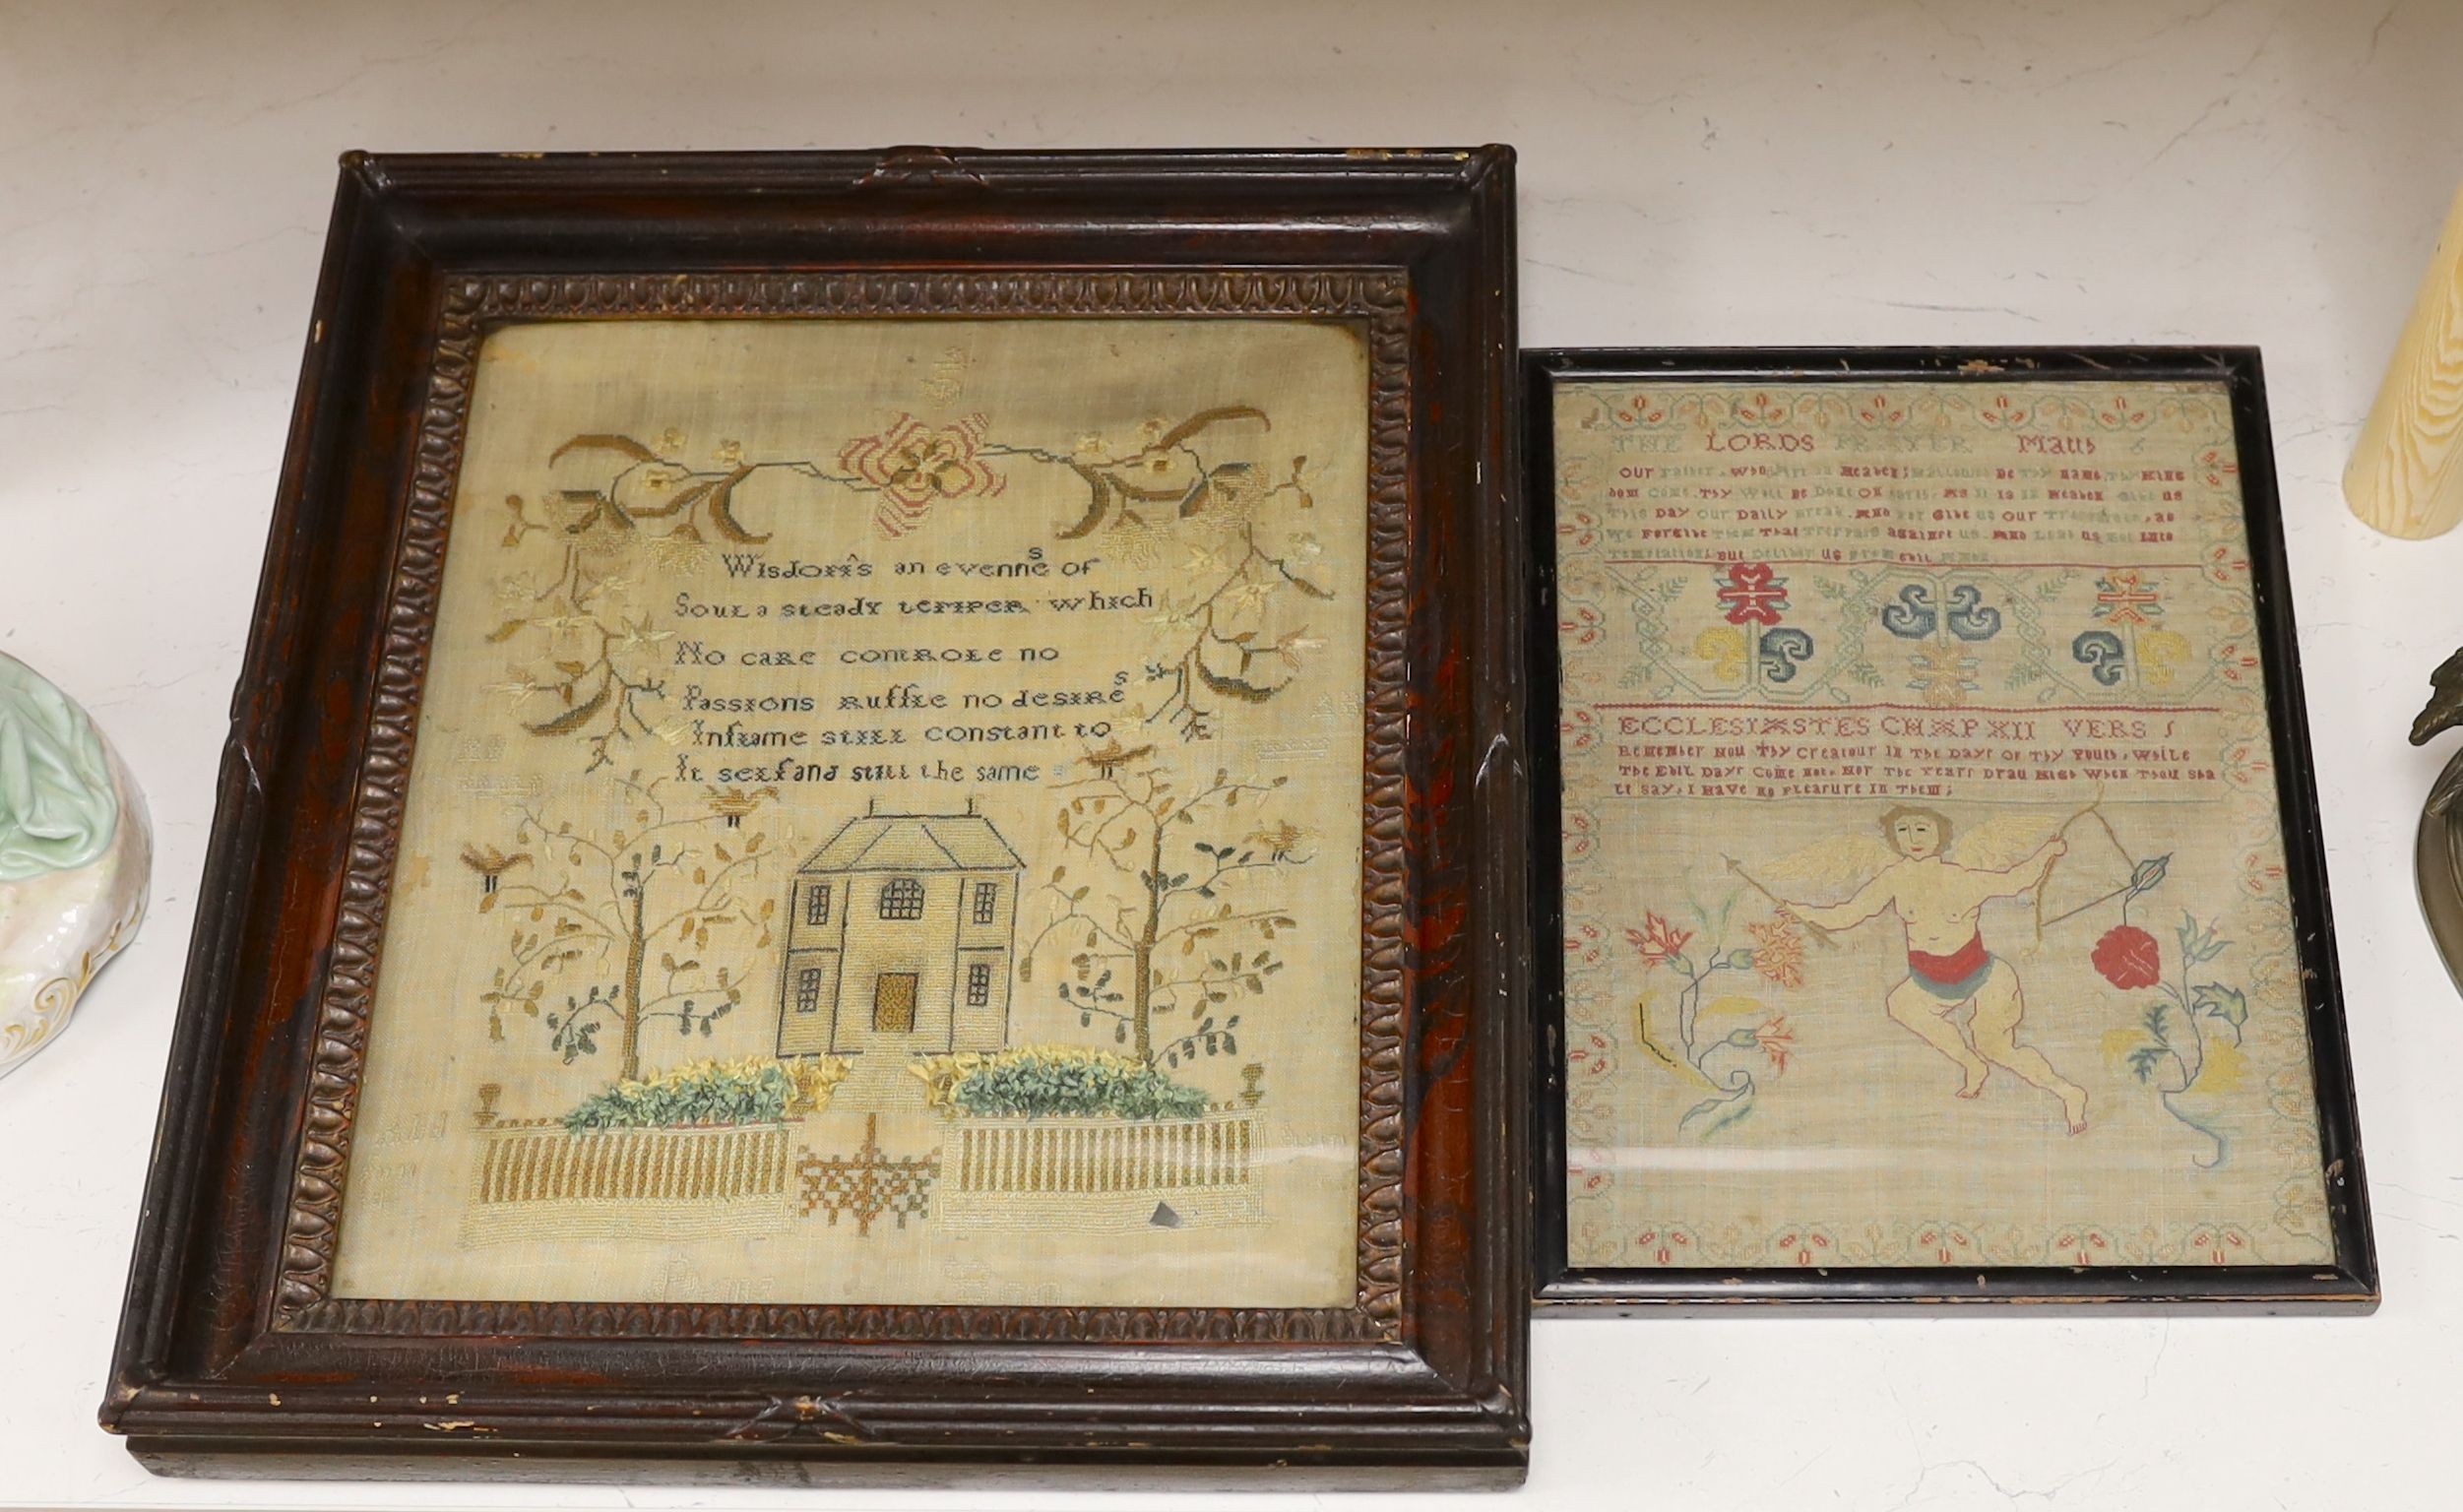 A George III finely embroidered Lords Prayer with angelic figure, flowers and text, 31 x 22cm, together with a later sampler, embroidered with house and trees, 35 x 29.5cm, both framed.